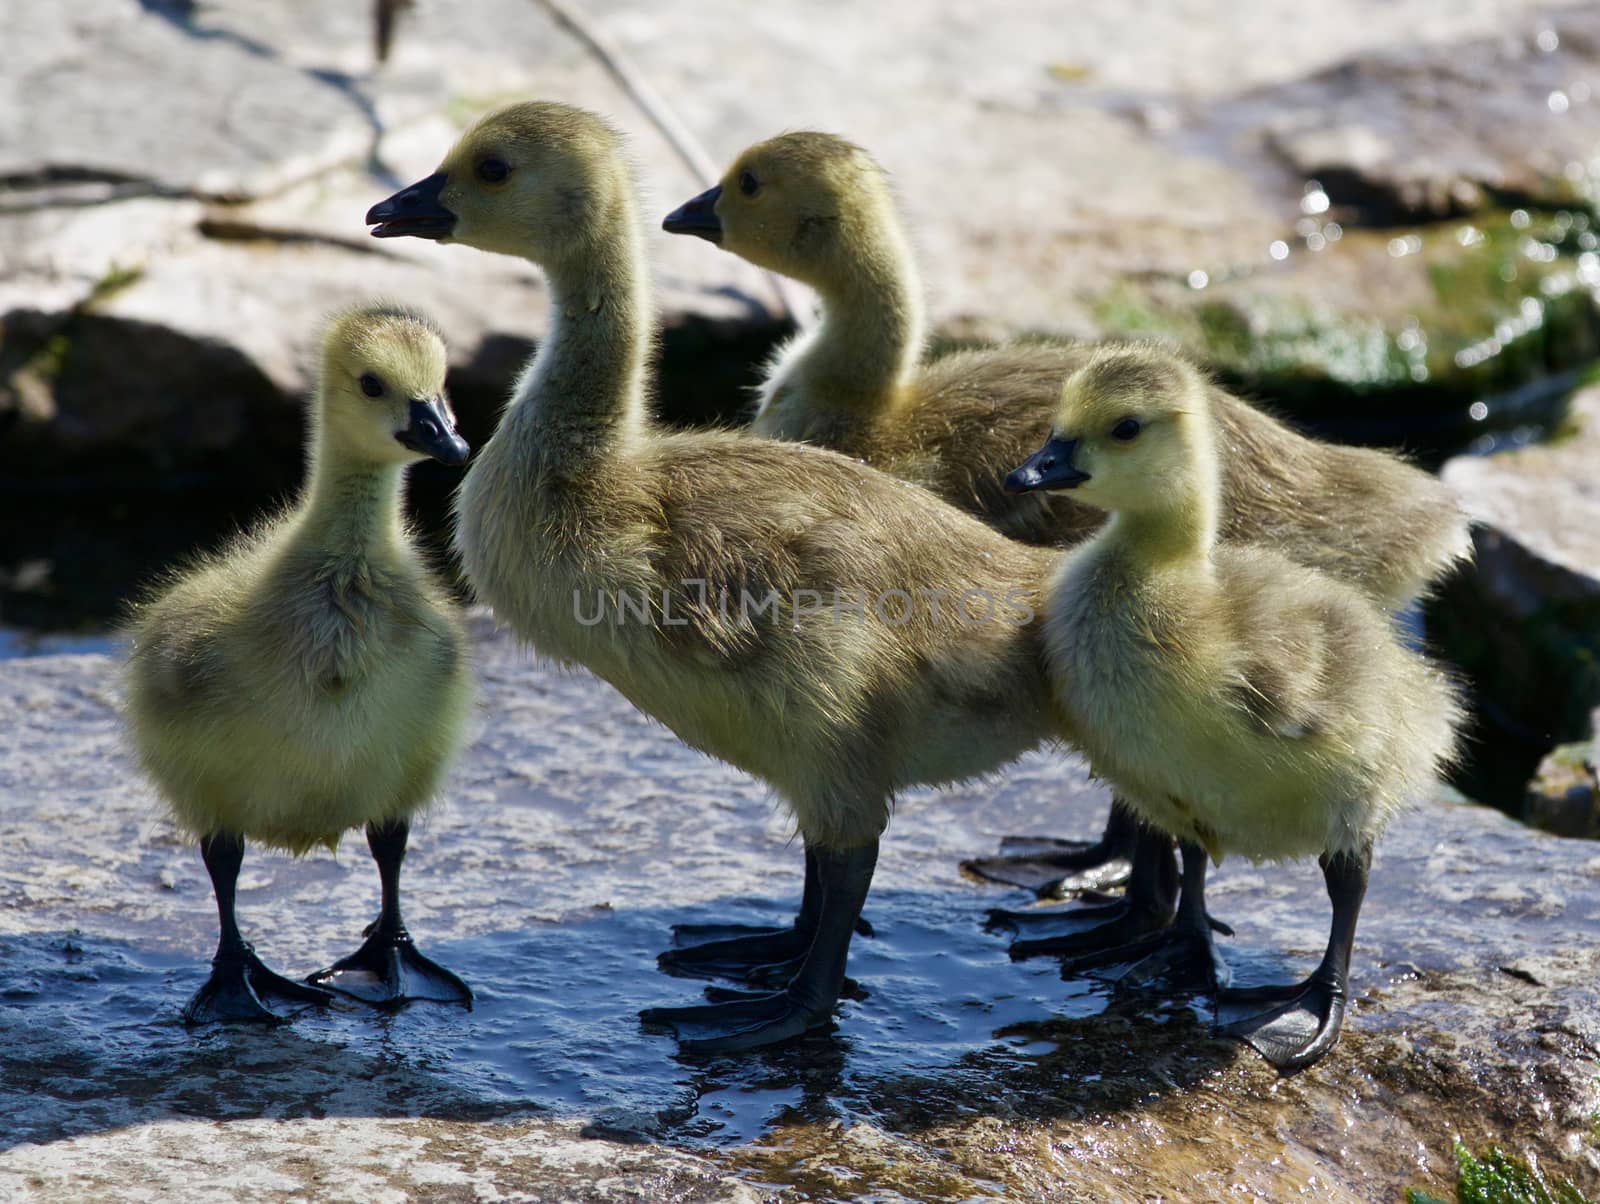 Beautiful photo of a group of the small chicks of the Canada geese by teo